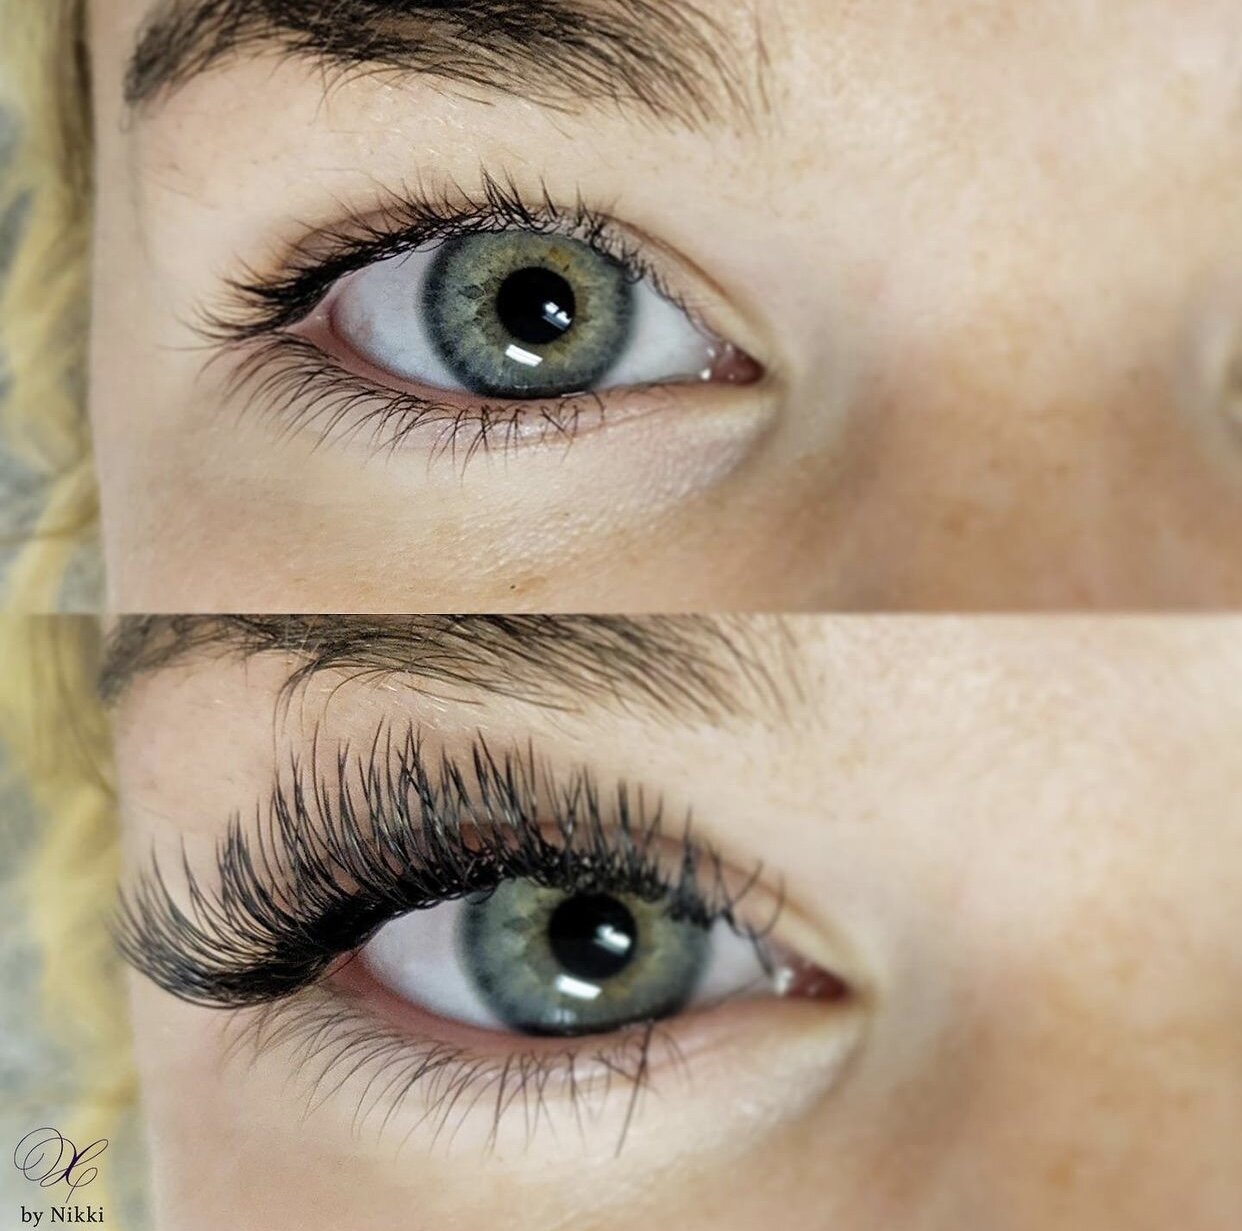 Eyelash Extensions: before and after. Eyelash Extensions can make a huge difference in the fullness and length of your lashes!